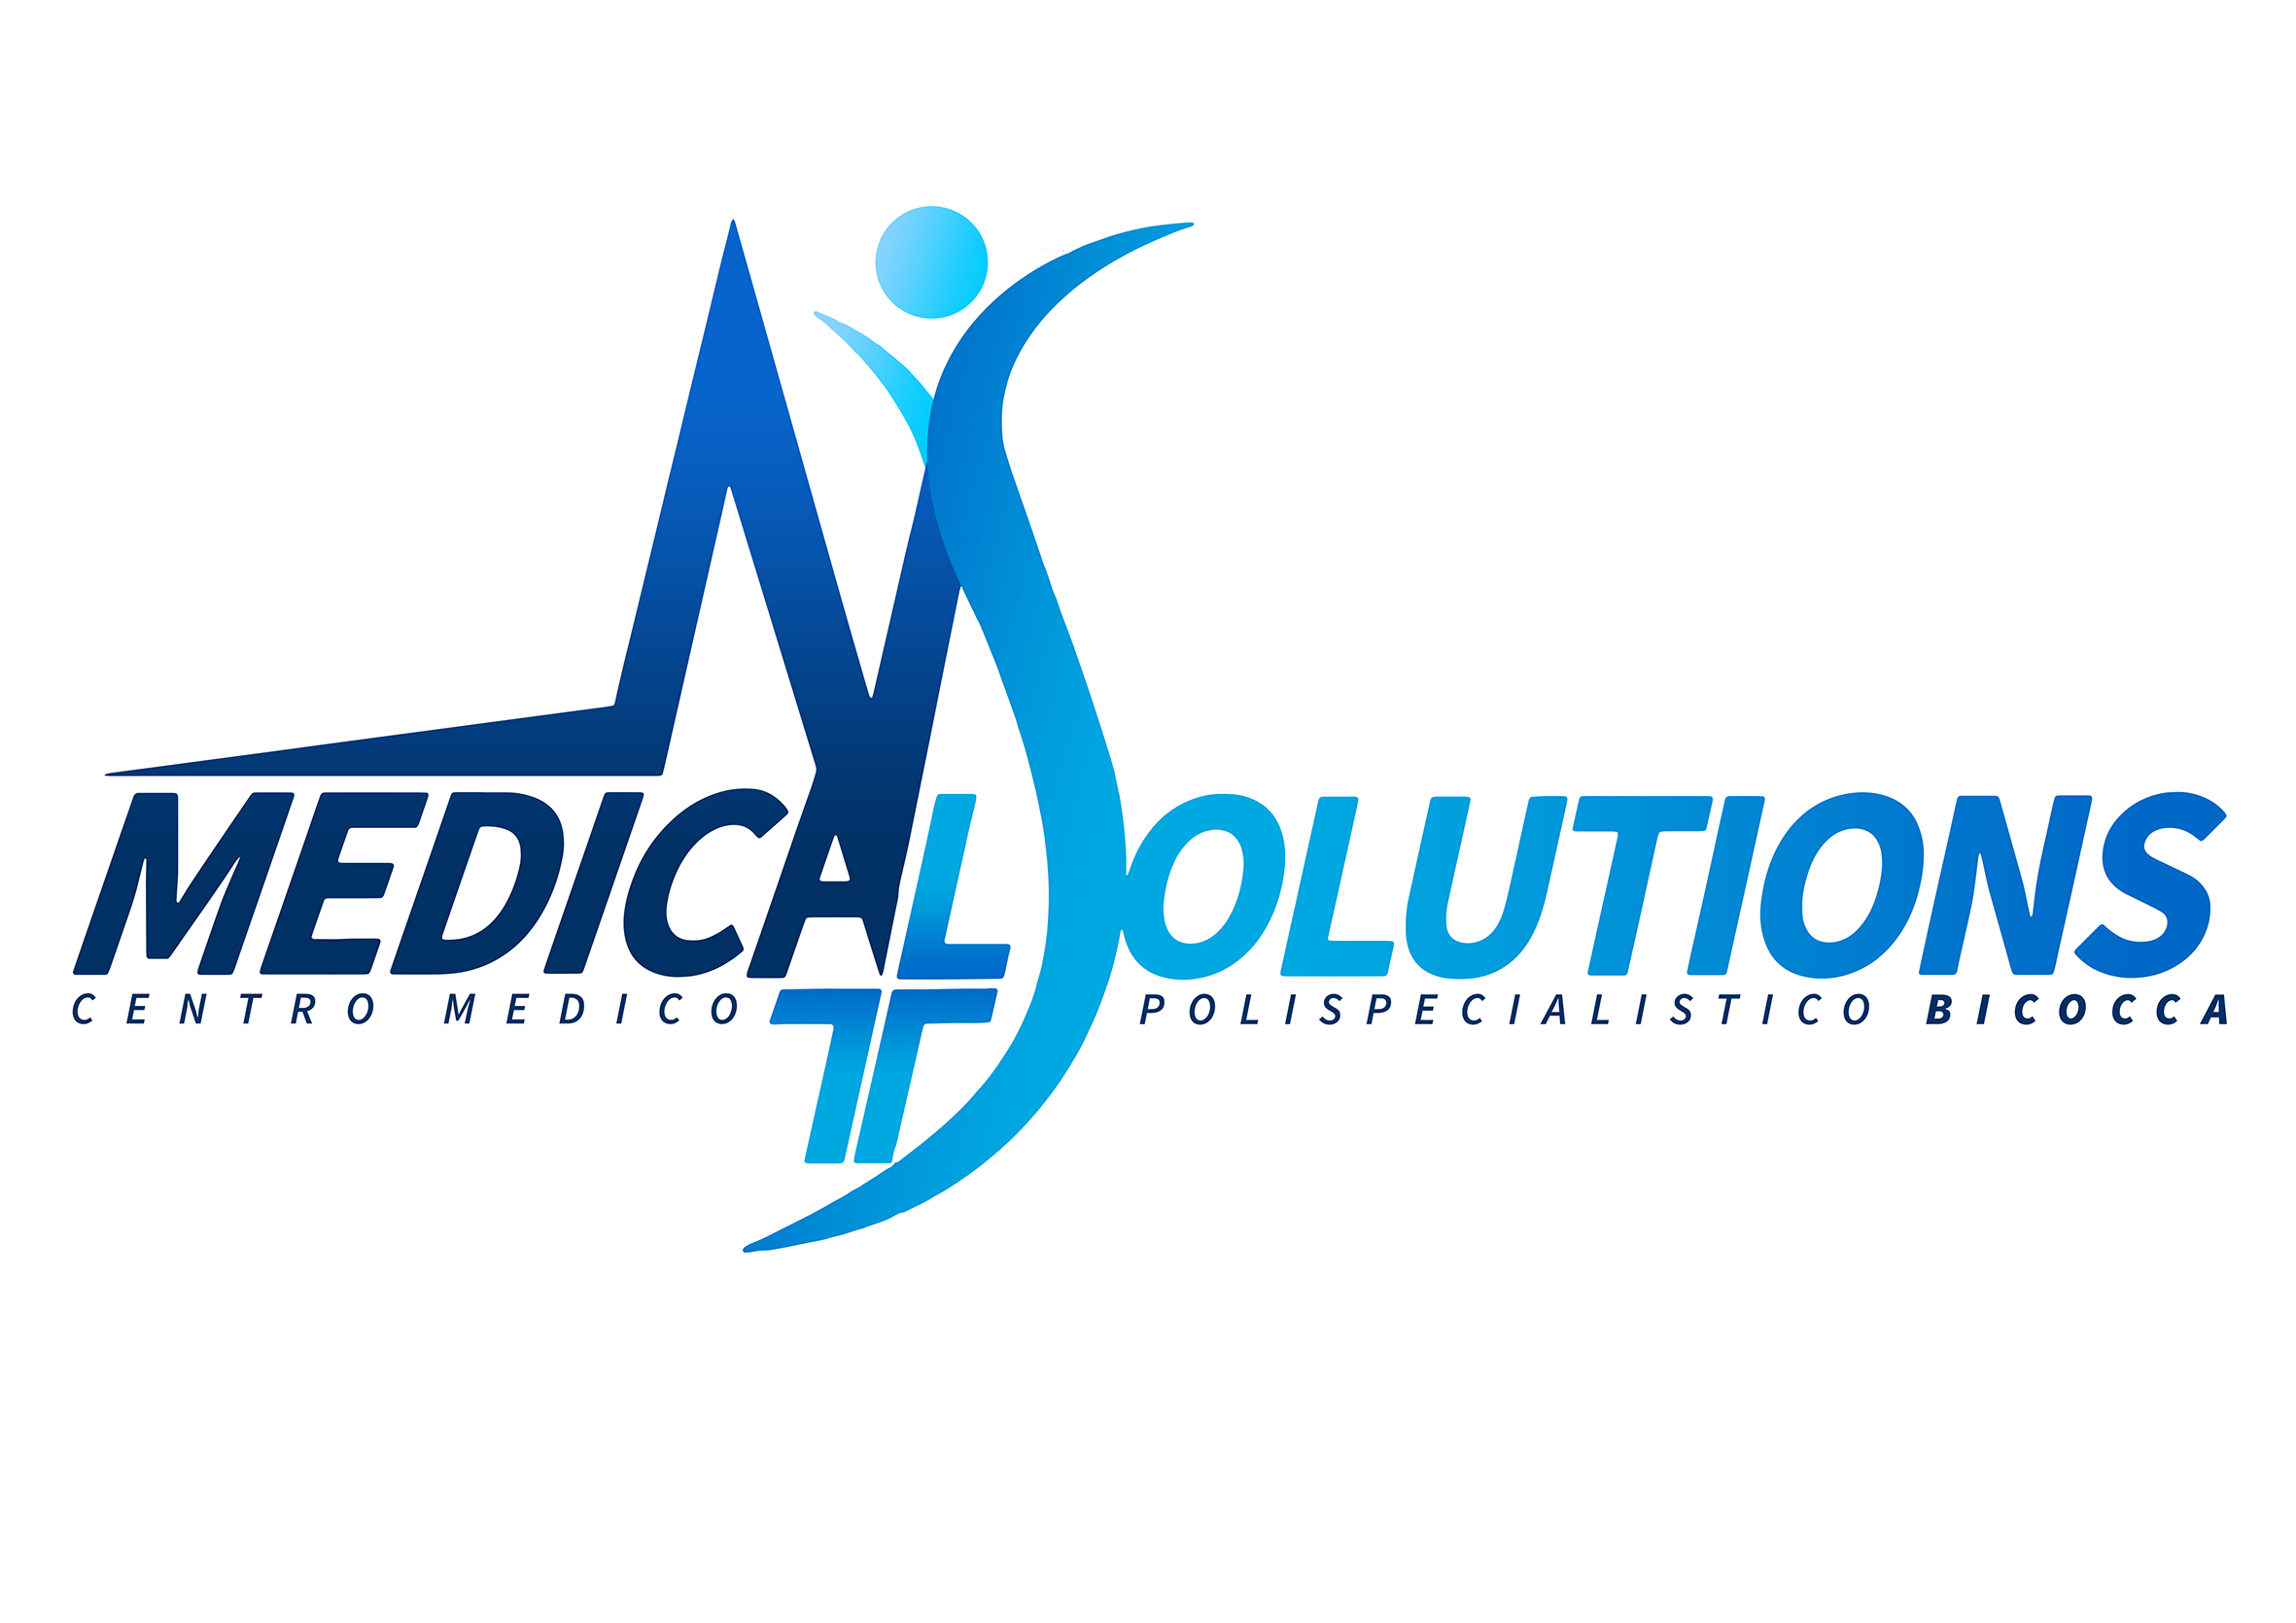 BICOCCA MEDICAL SOLUTIONS